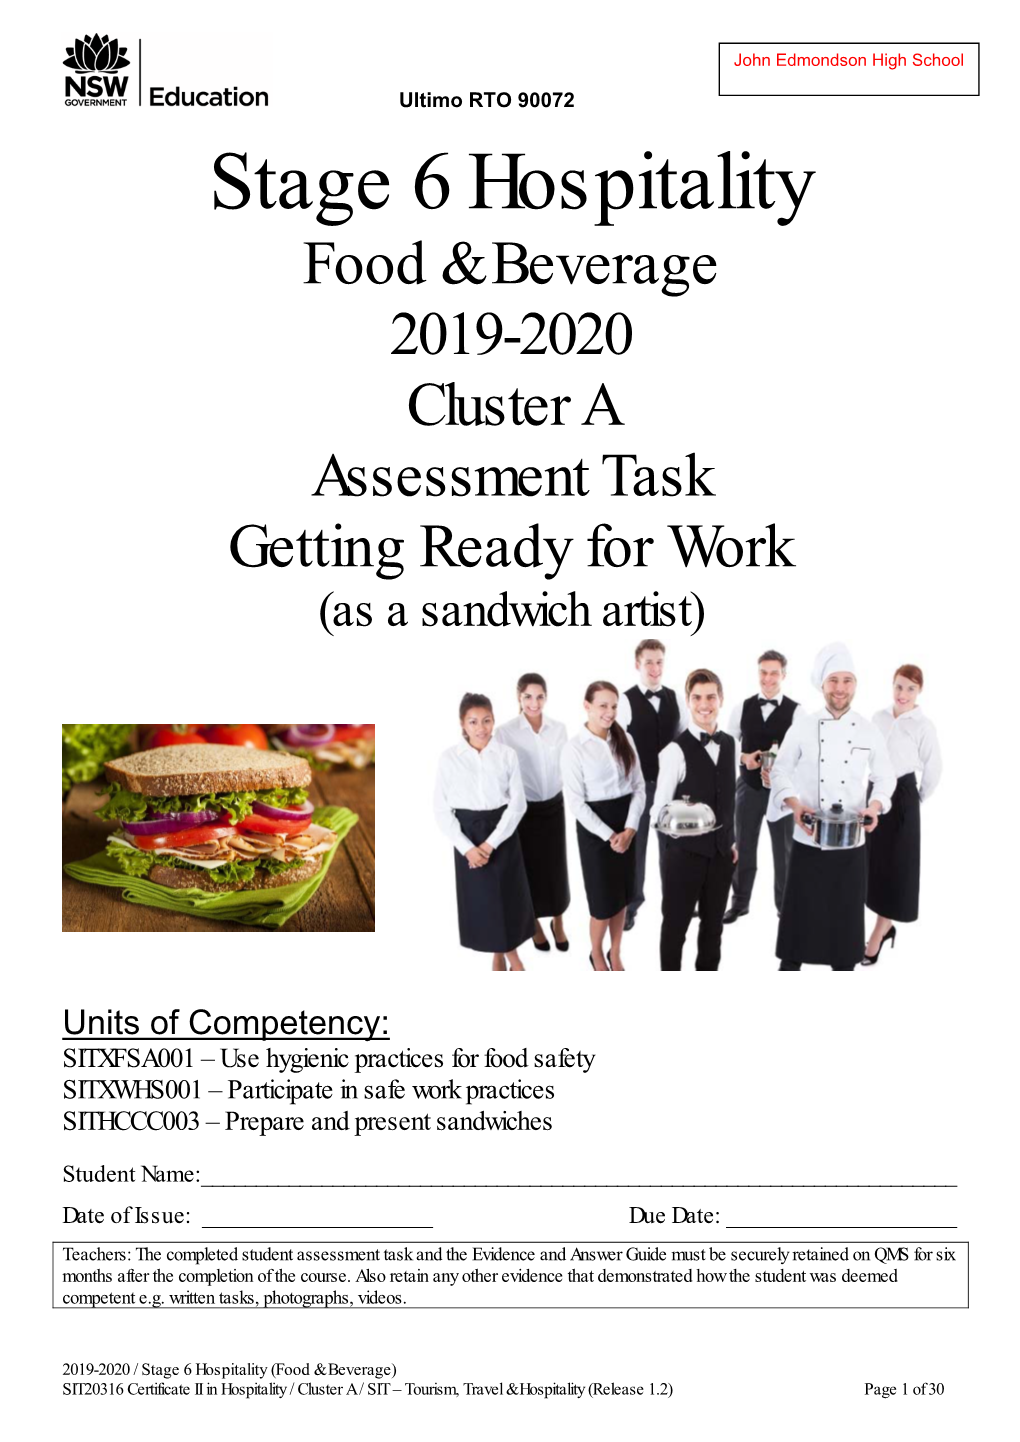 Stage 6 Hospitality Food & Beverage 2019-2020 Cluster a Assessment Task Getting Ready for Work (As a Sandwich Artist)